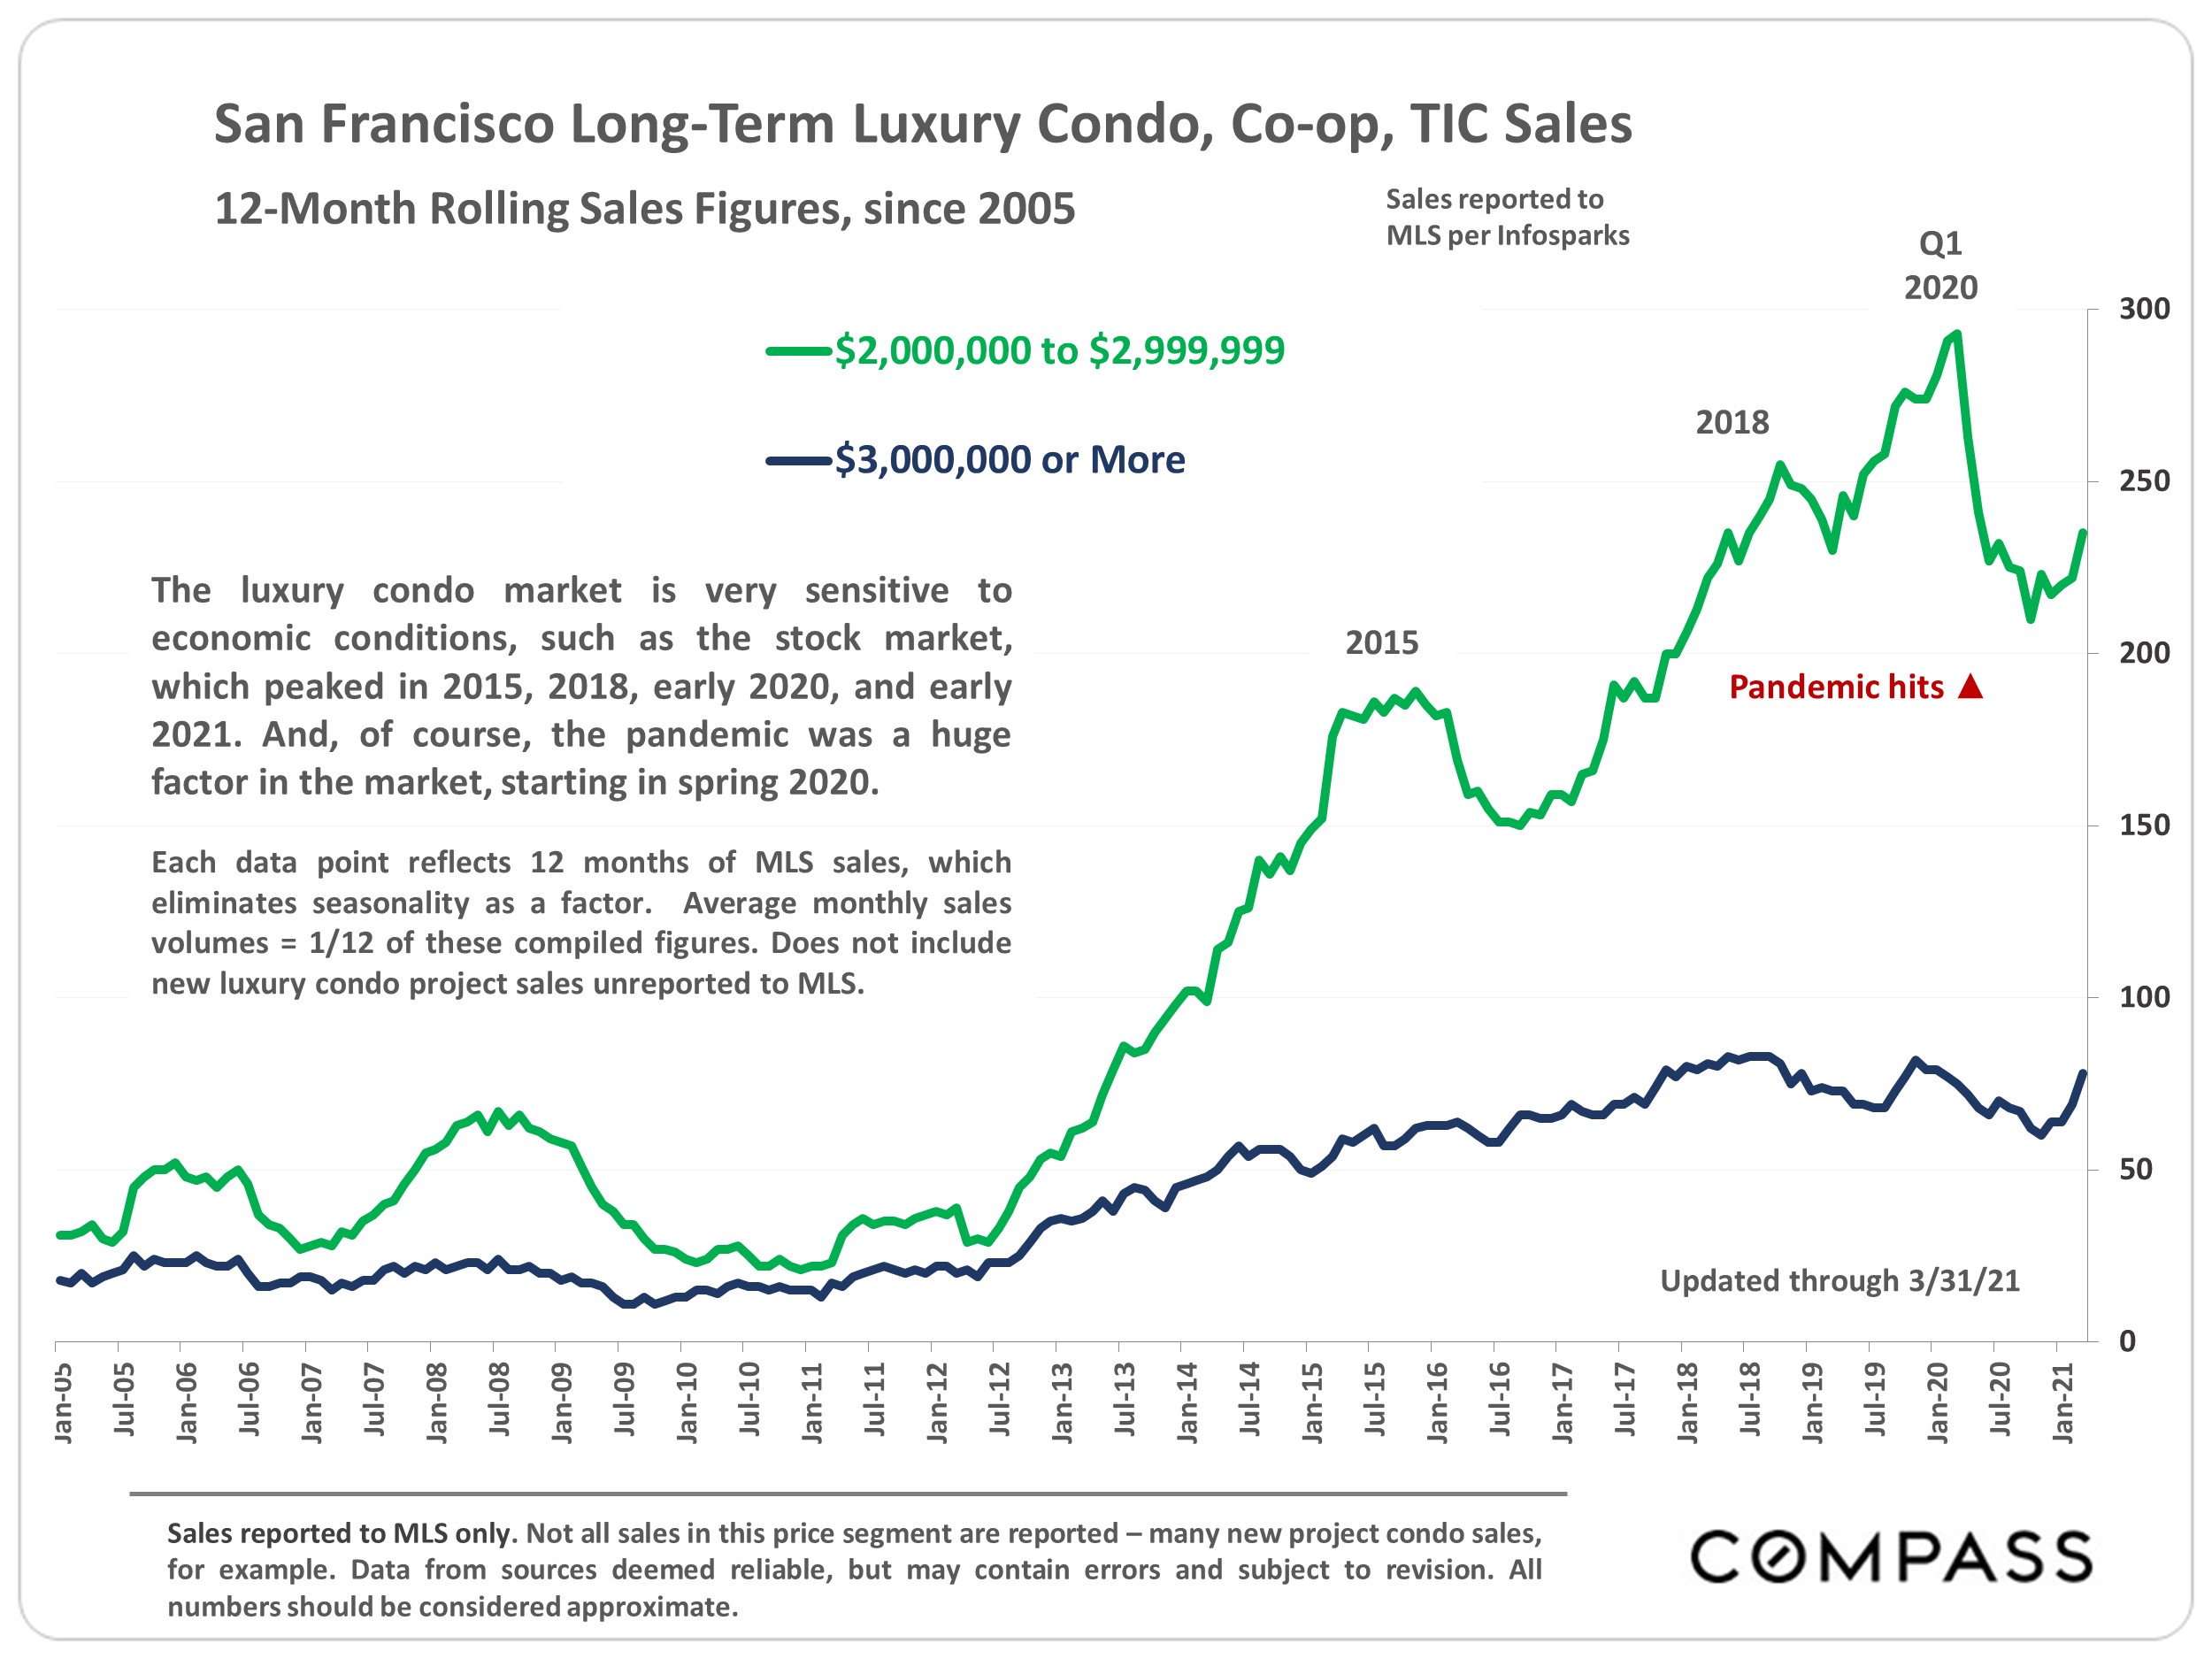 Chart showing the San Francisco Long-Term Luxury Condo, Co-op, TIC Sales, 12-Month Rolling Sales Figures, since 2005